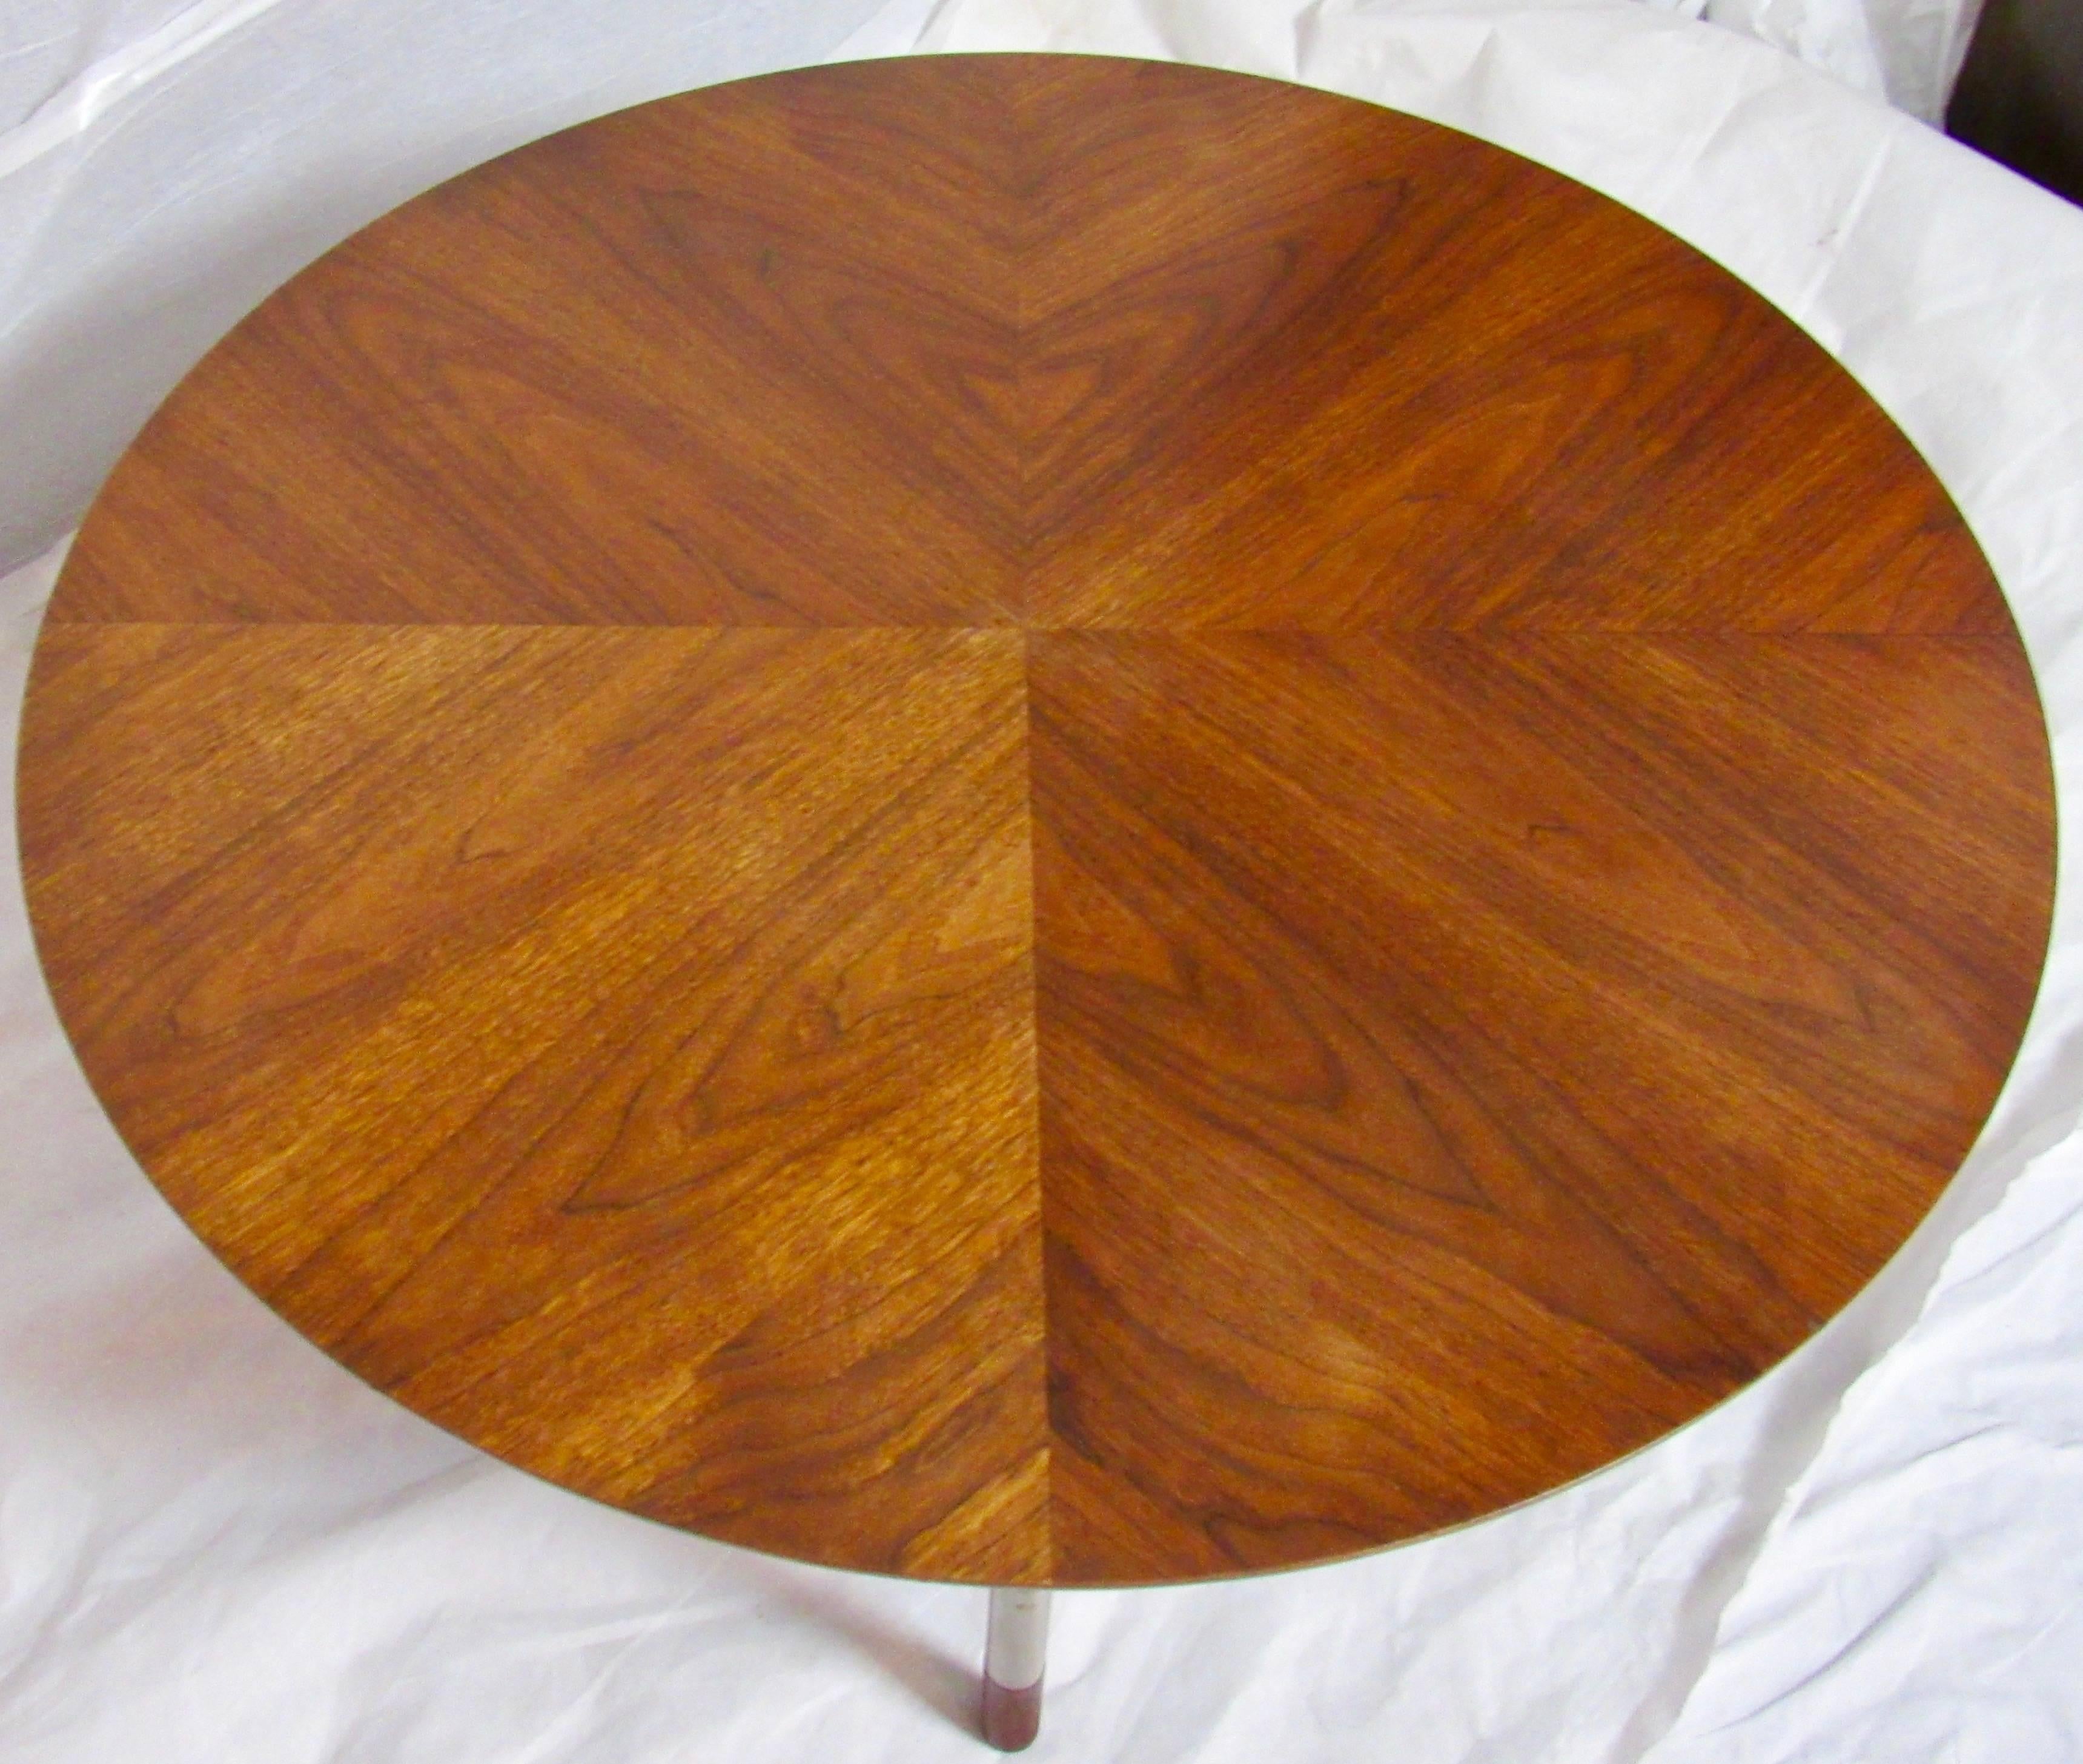 Plated Jack Cartwright Walnut and Steel Coffee Table for Founders Furniture C. 1965 For Sale